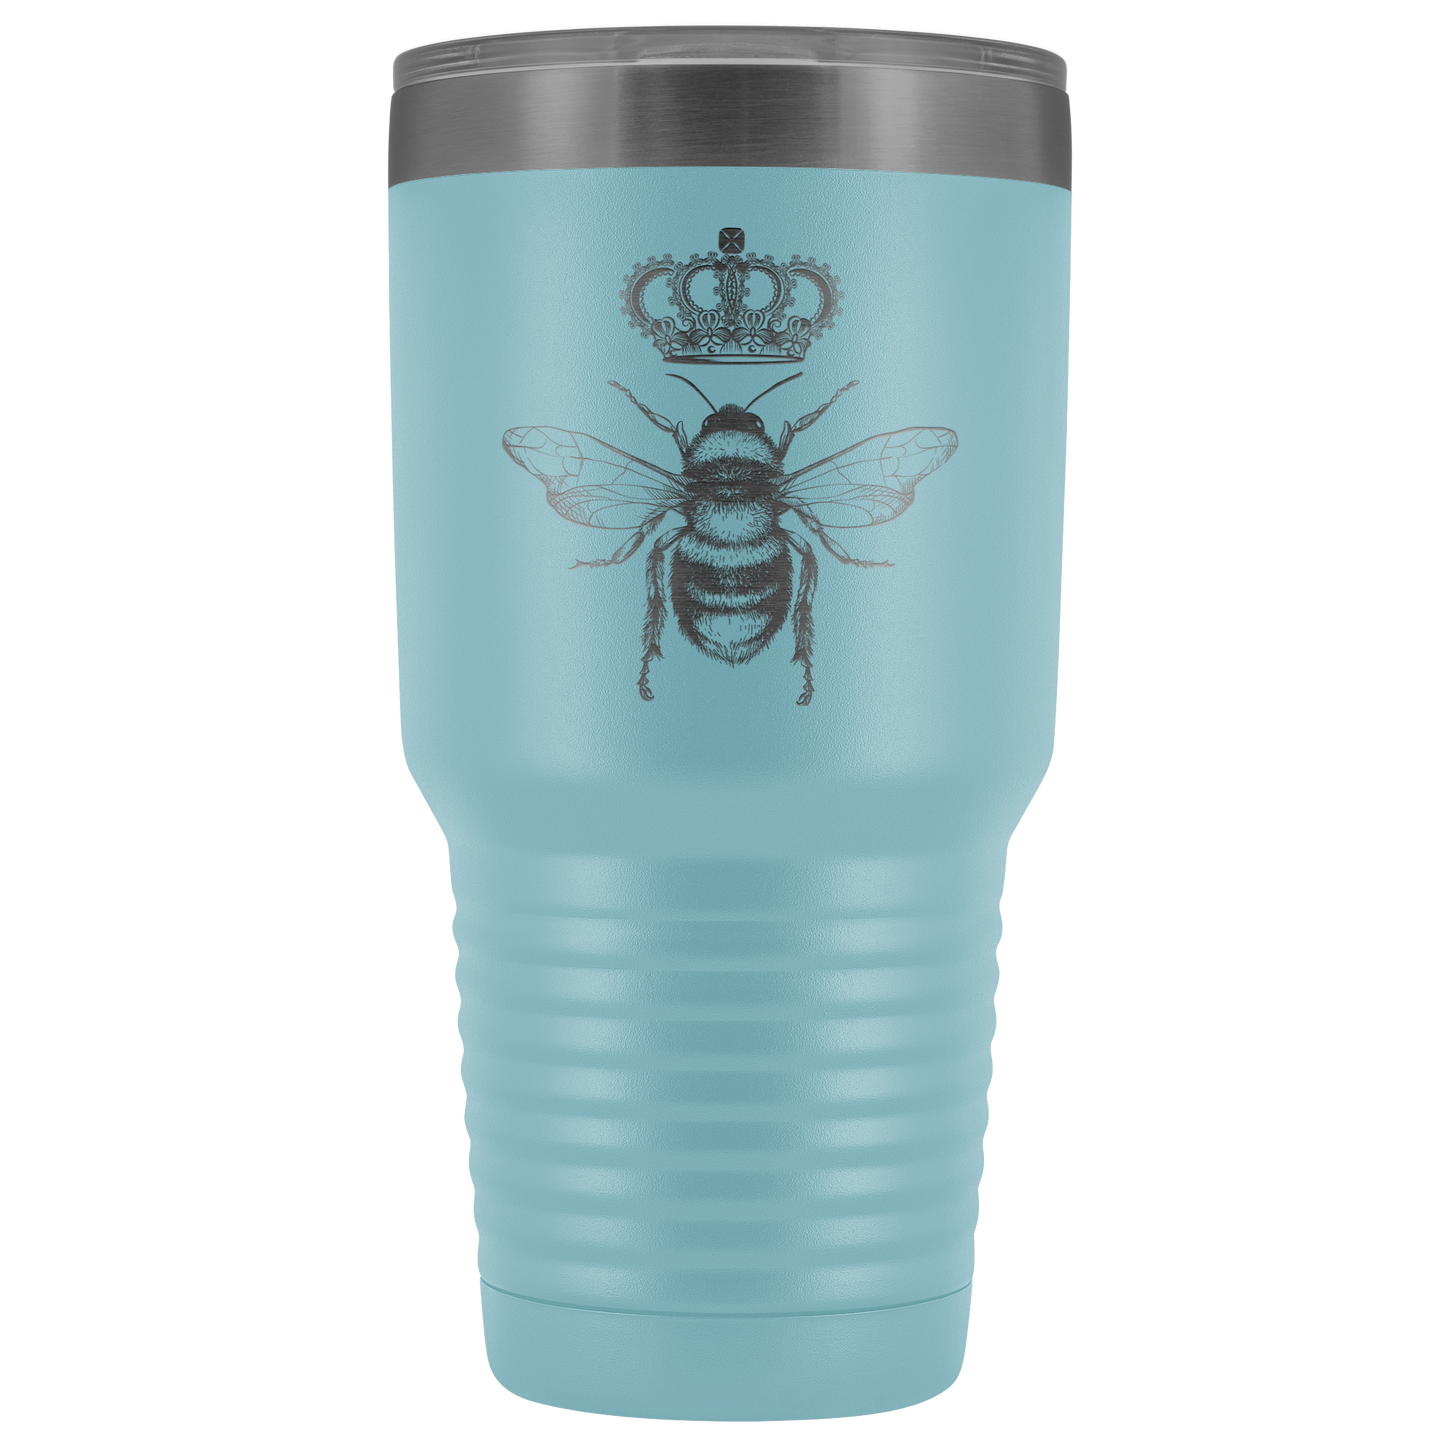 QB CLASSY QUEEN BEE LIMITED EDITION TUMLER